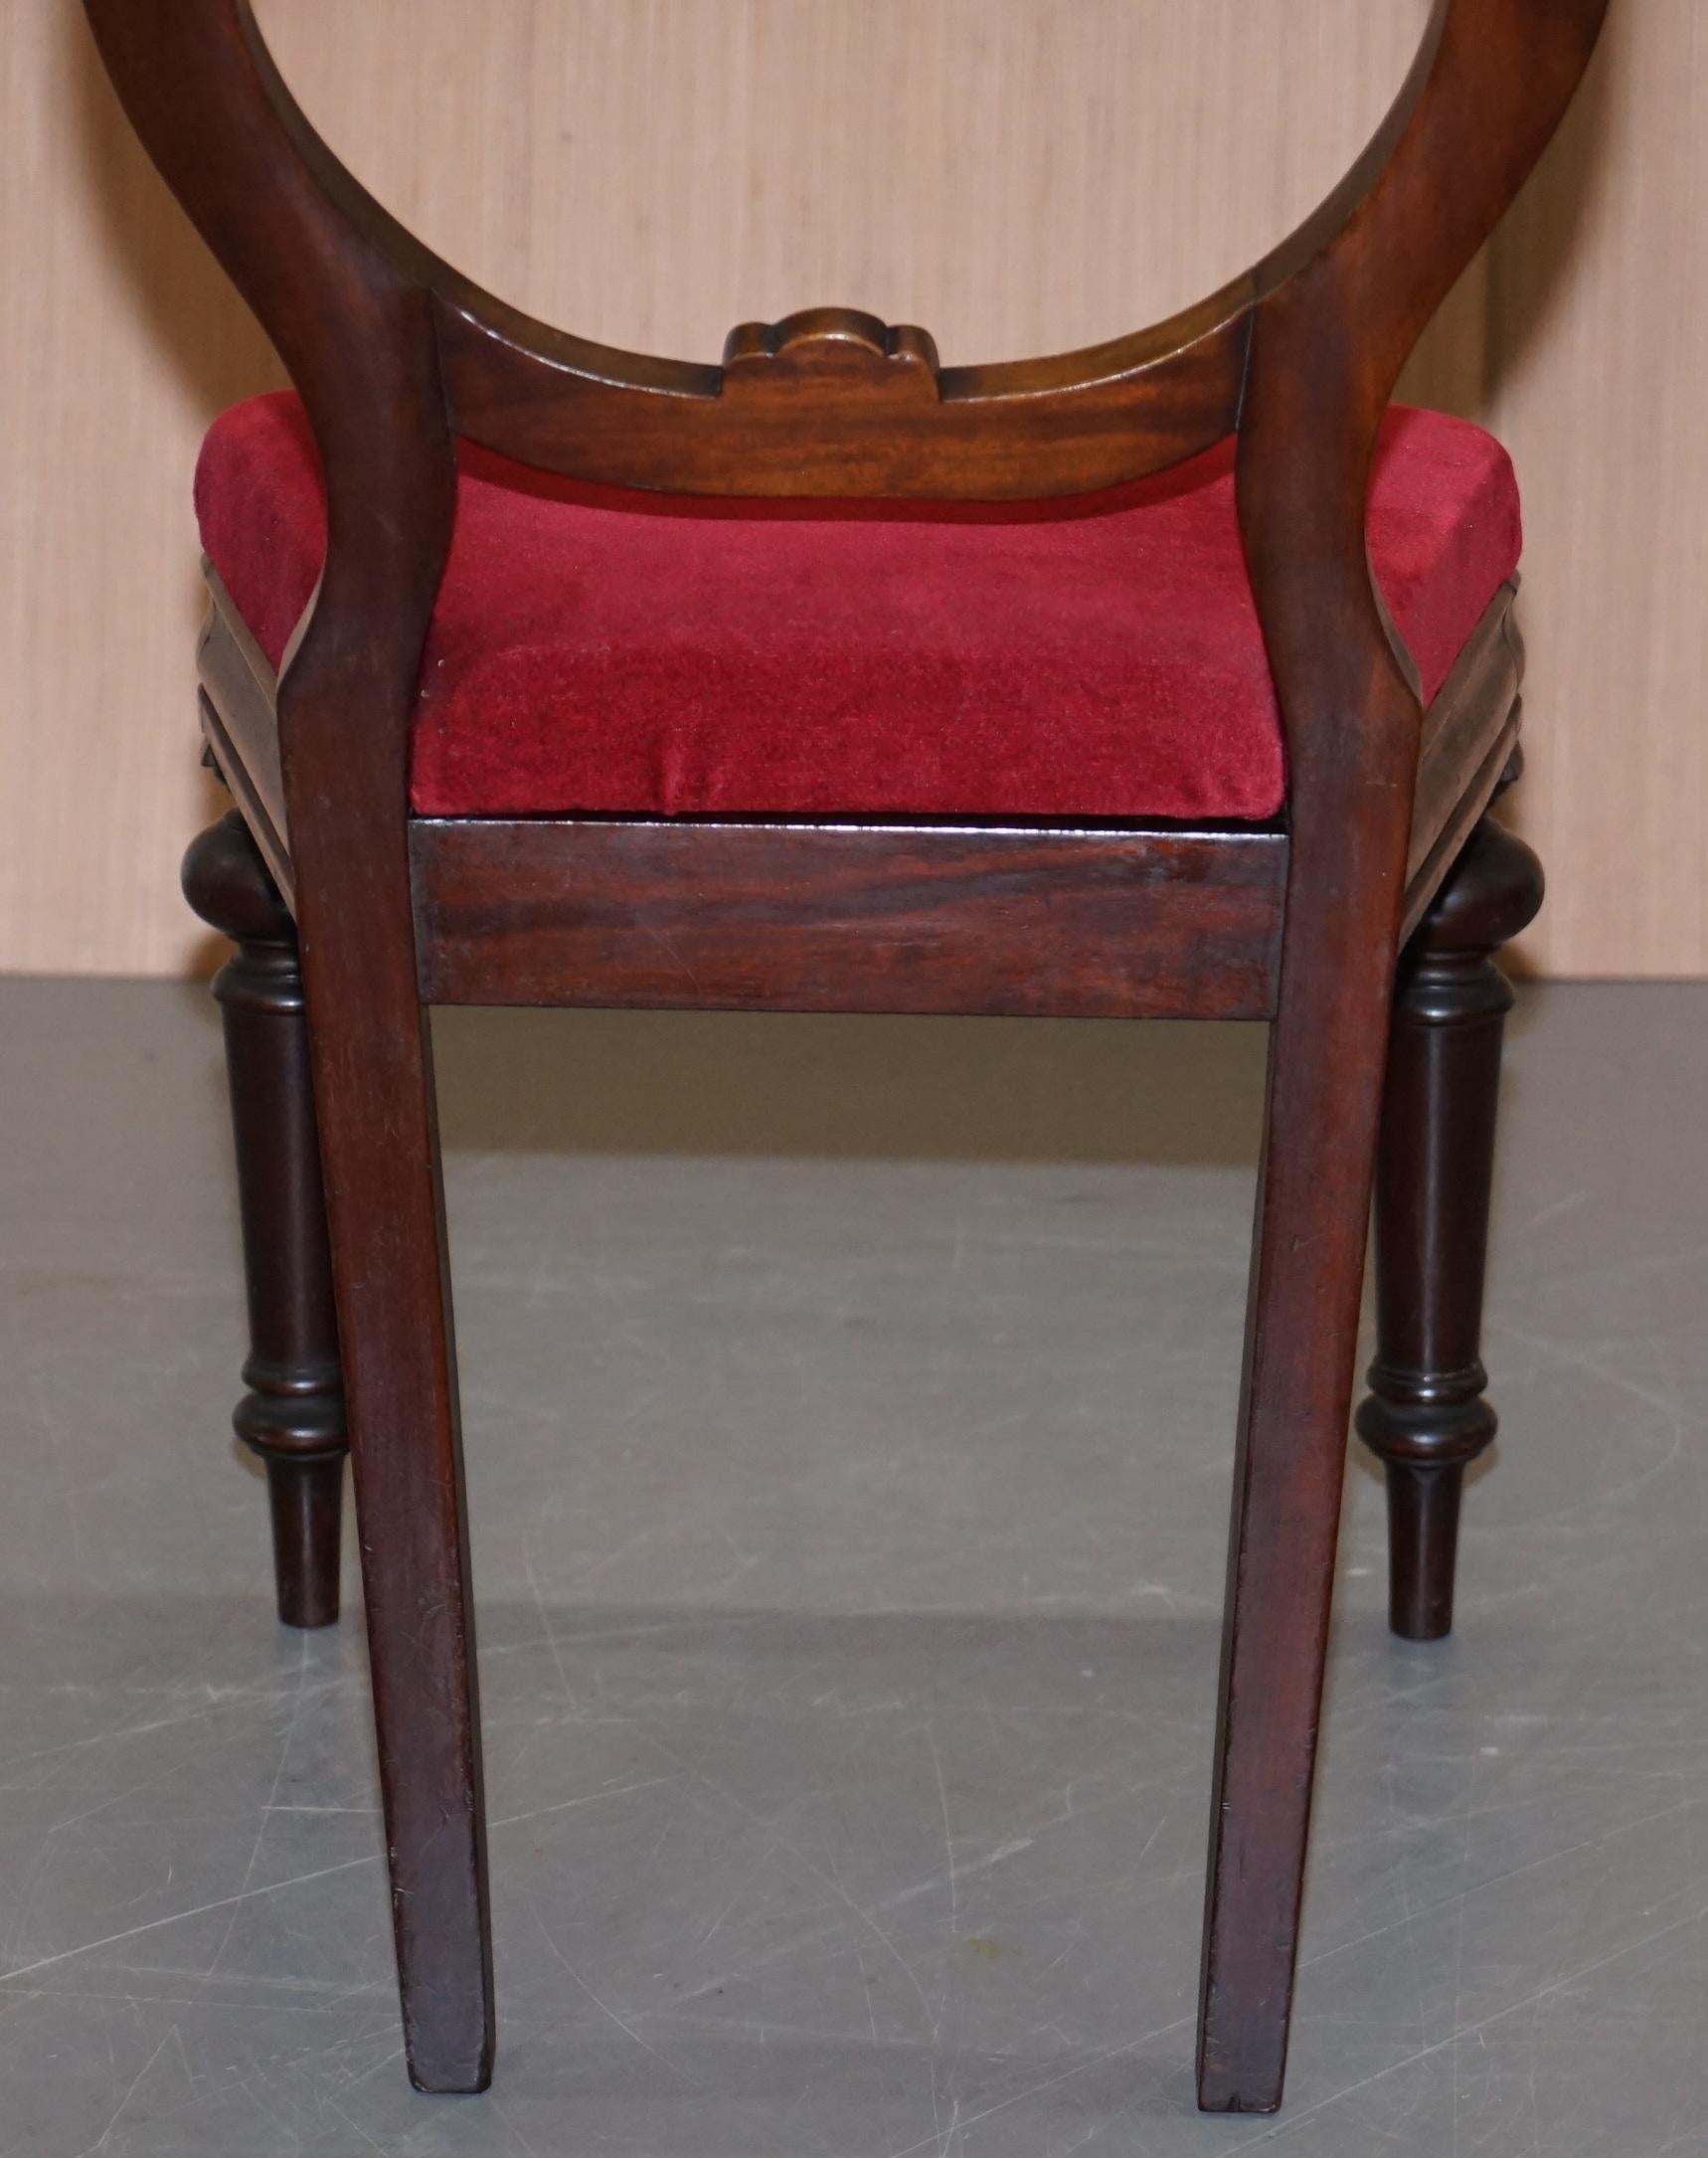 Nice Edwardian Medallion Spoon Back Chair for Dressing Table or Desk Office Use 4